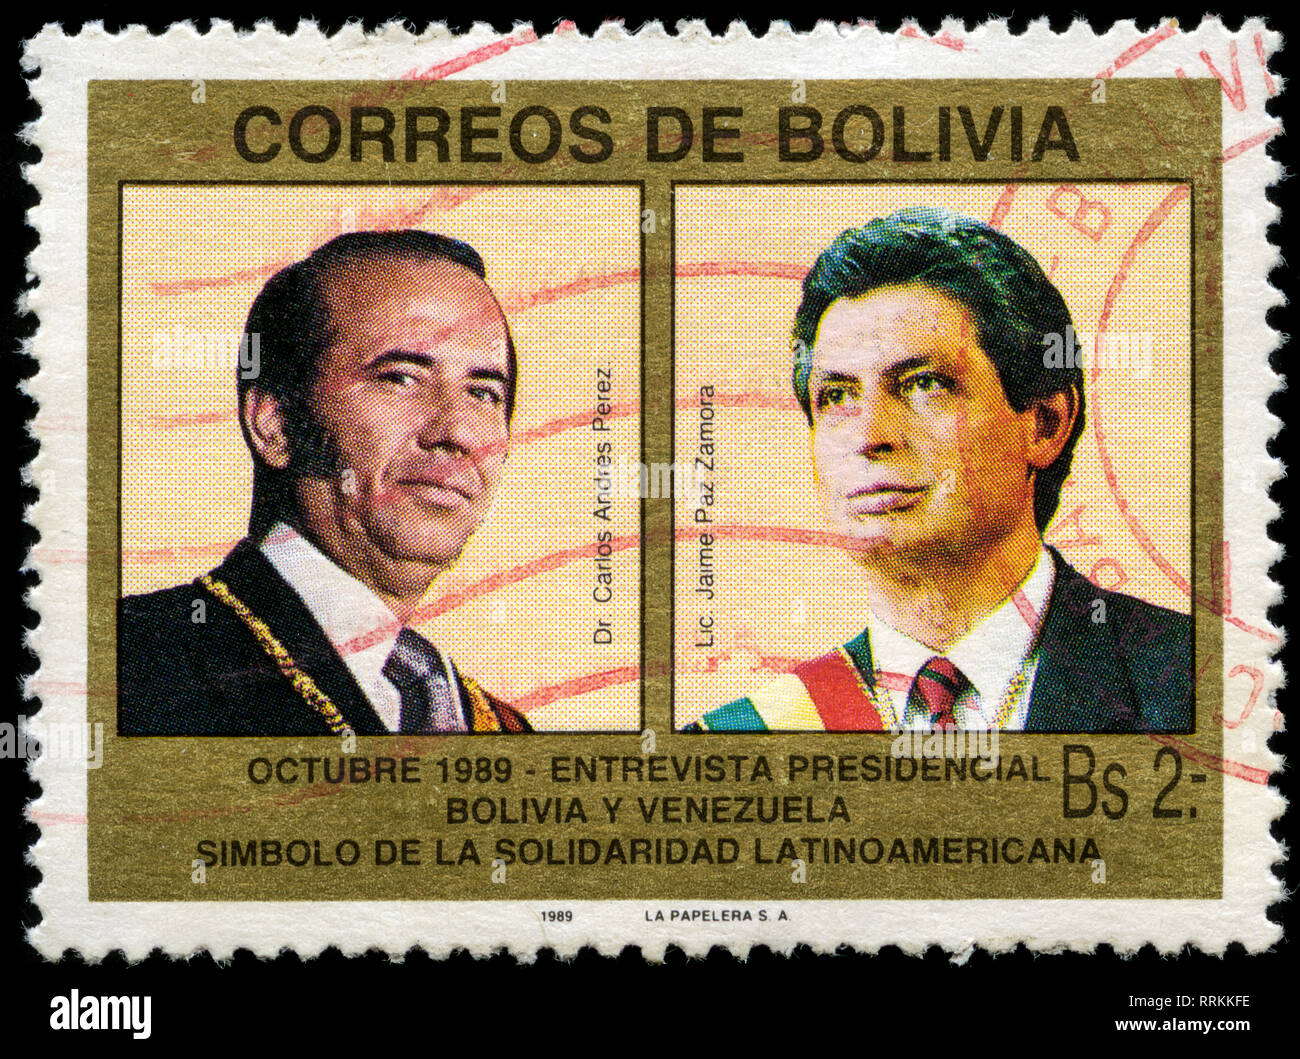 Postage stamp from Bolivia in the Meeting of the Presidents of Bolivia and Venezuela series issued in 1989 Stock Photo